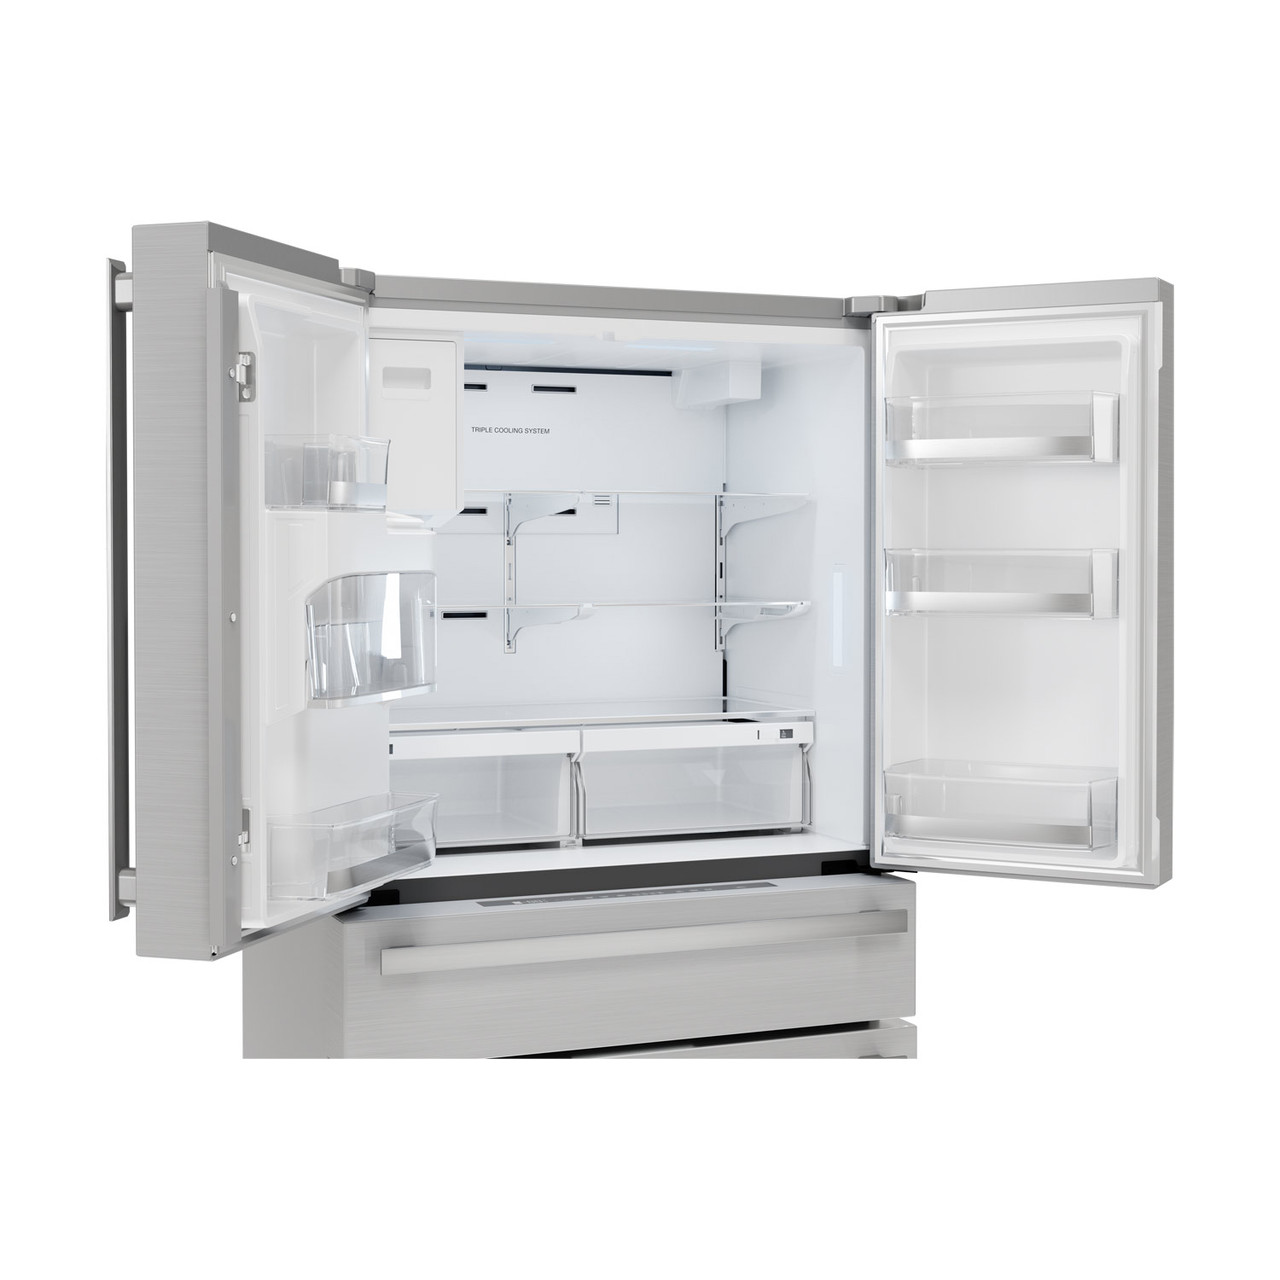 Sharp French 4-Door Counter-Depth Refrigerator with Water Dispenser (SJG2254FS) - right angle view with doors open